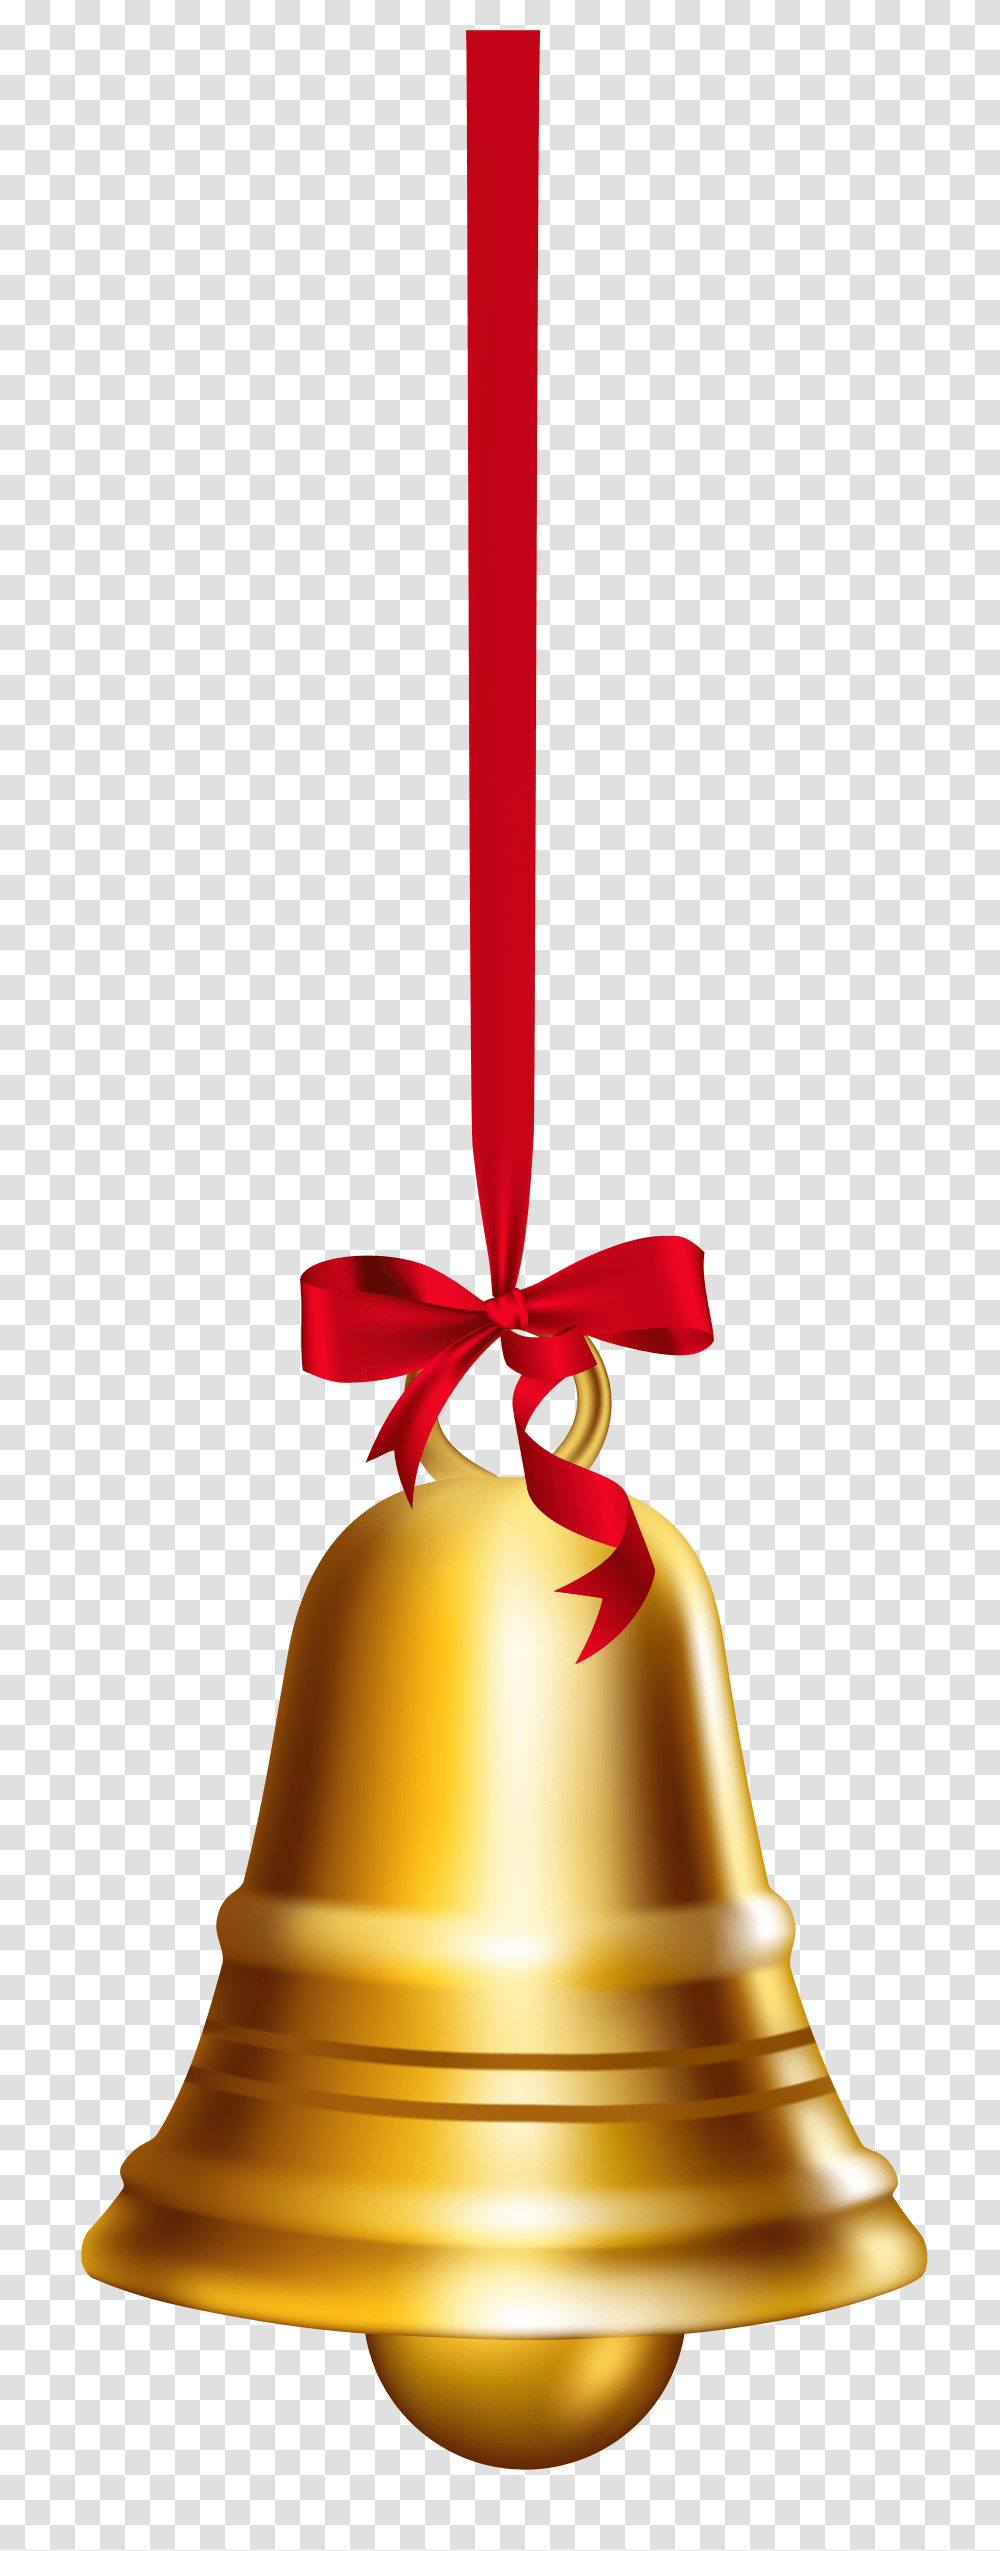 Gold Bell Clip Art, Plant, Lamp, Food, Pear Transparent Png